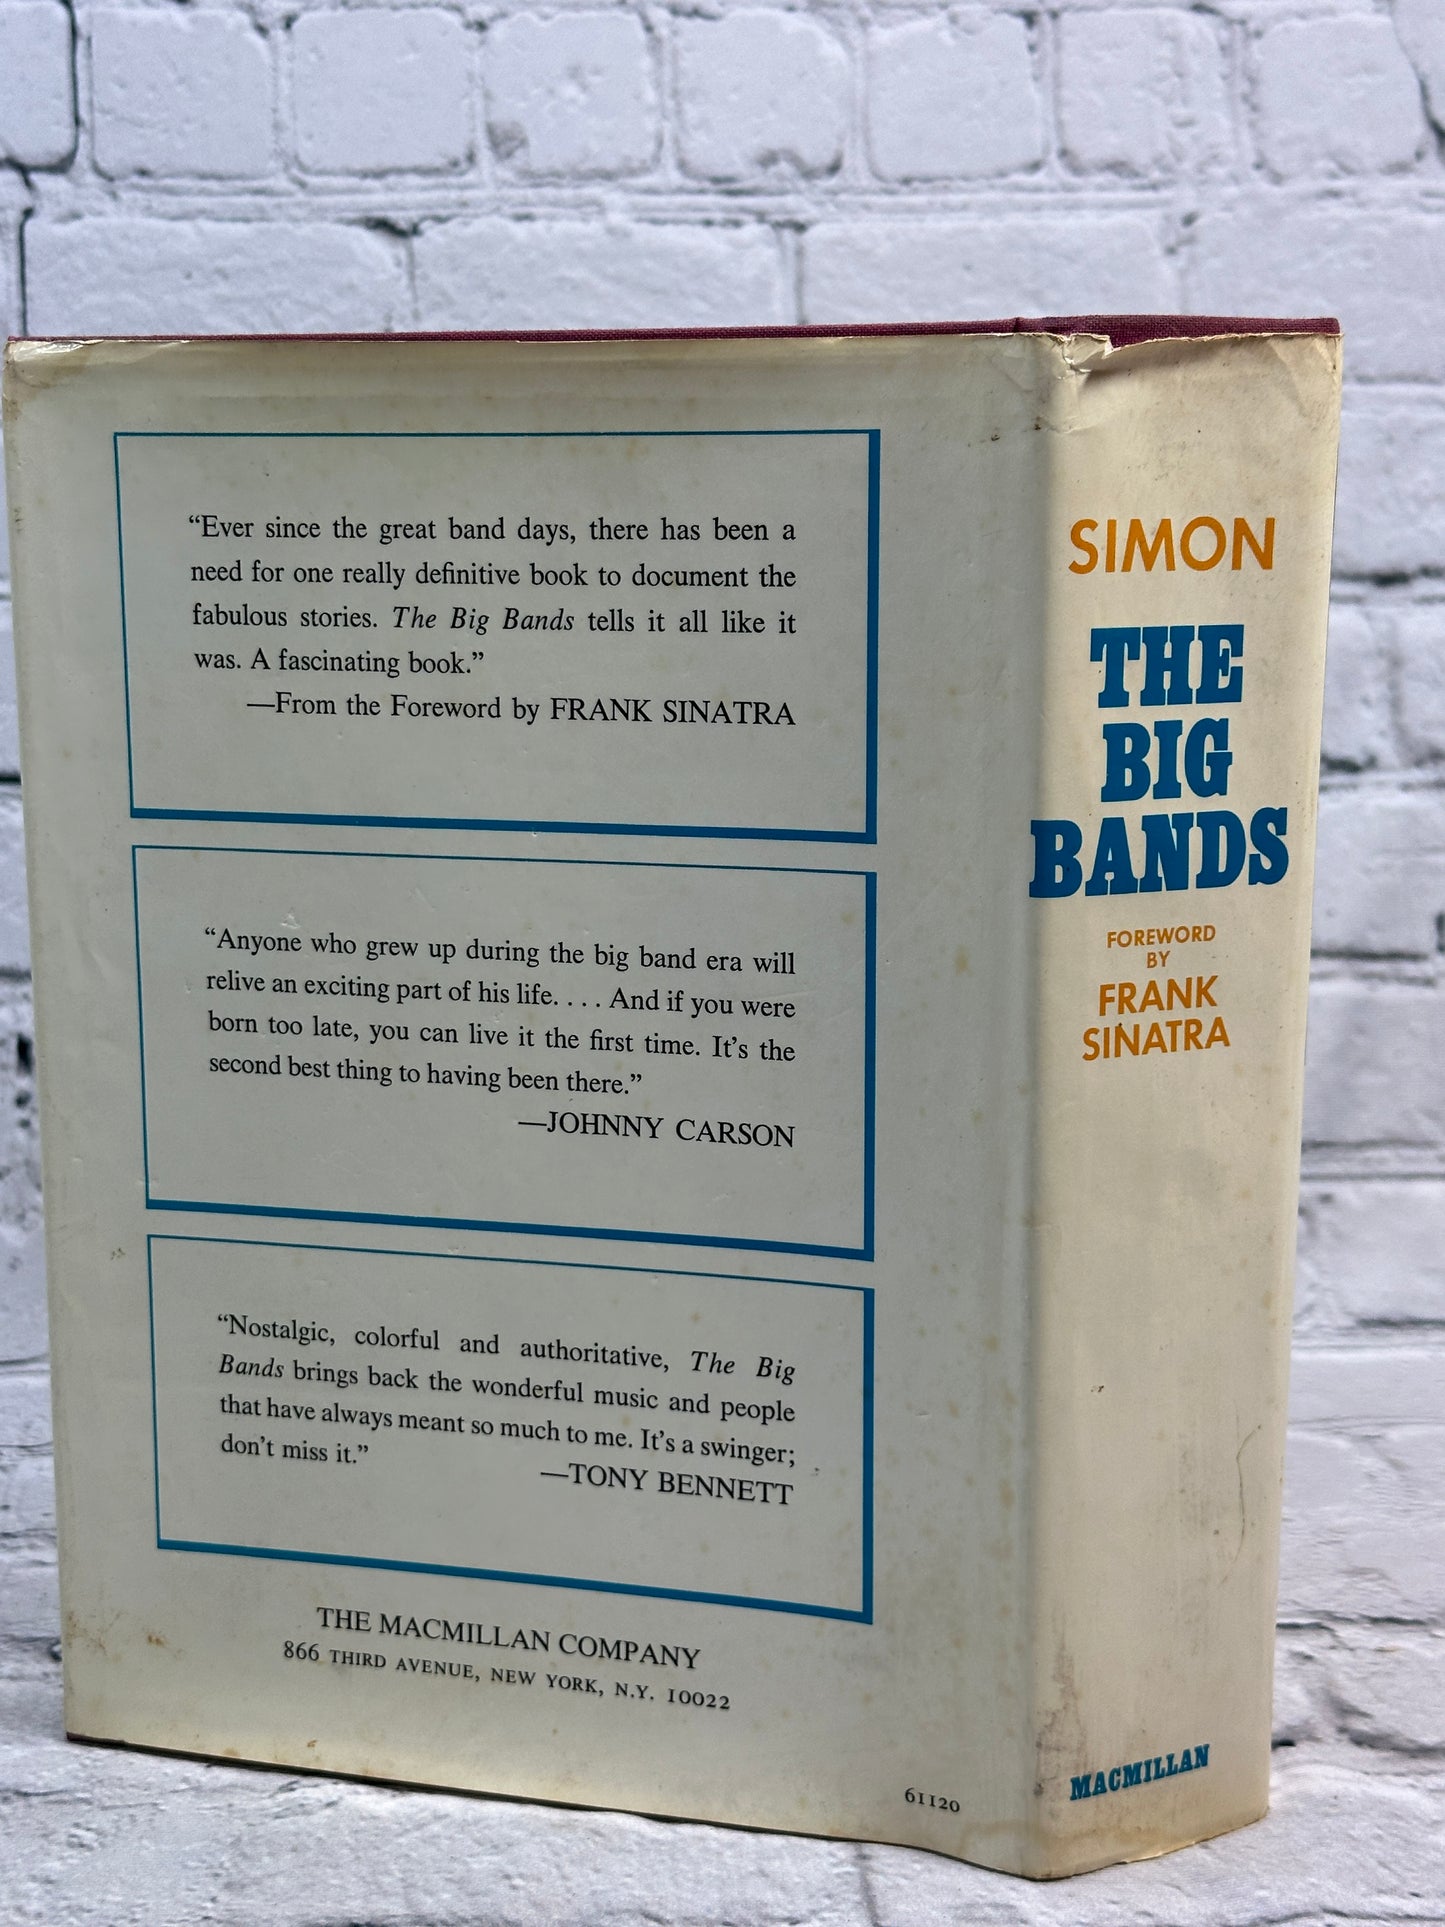 The Big Bands by George T. Simon [1969 · Seventh Printing]